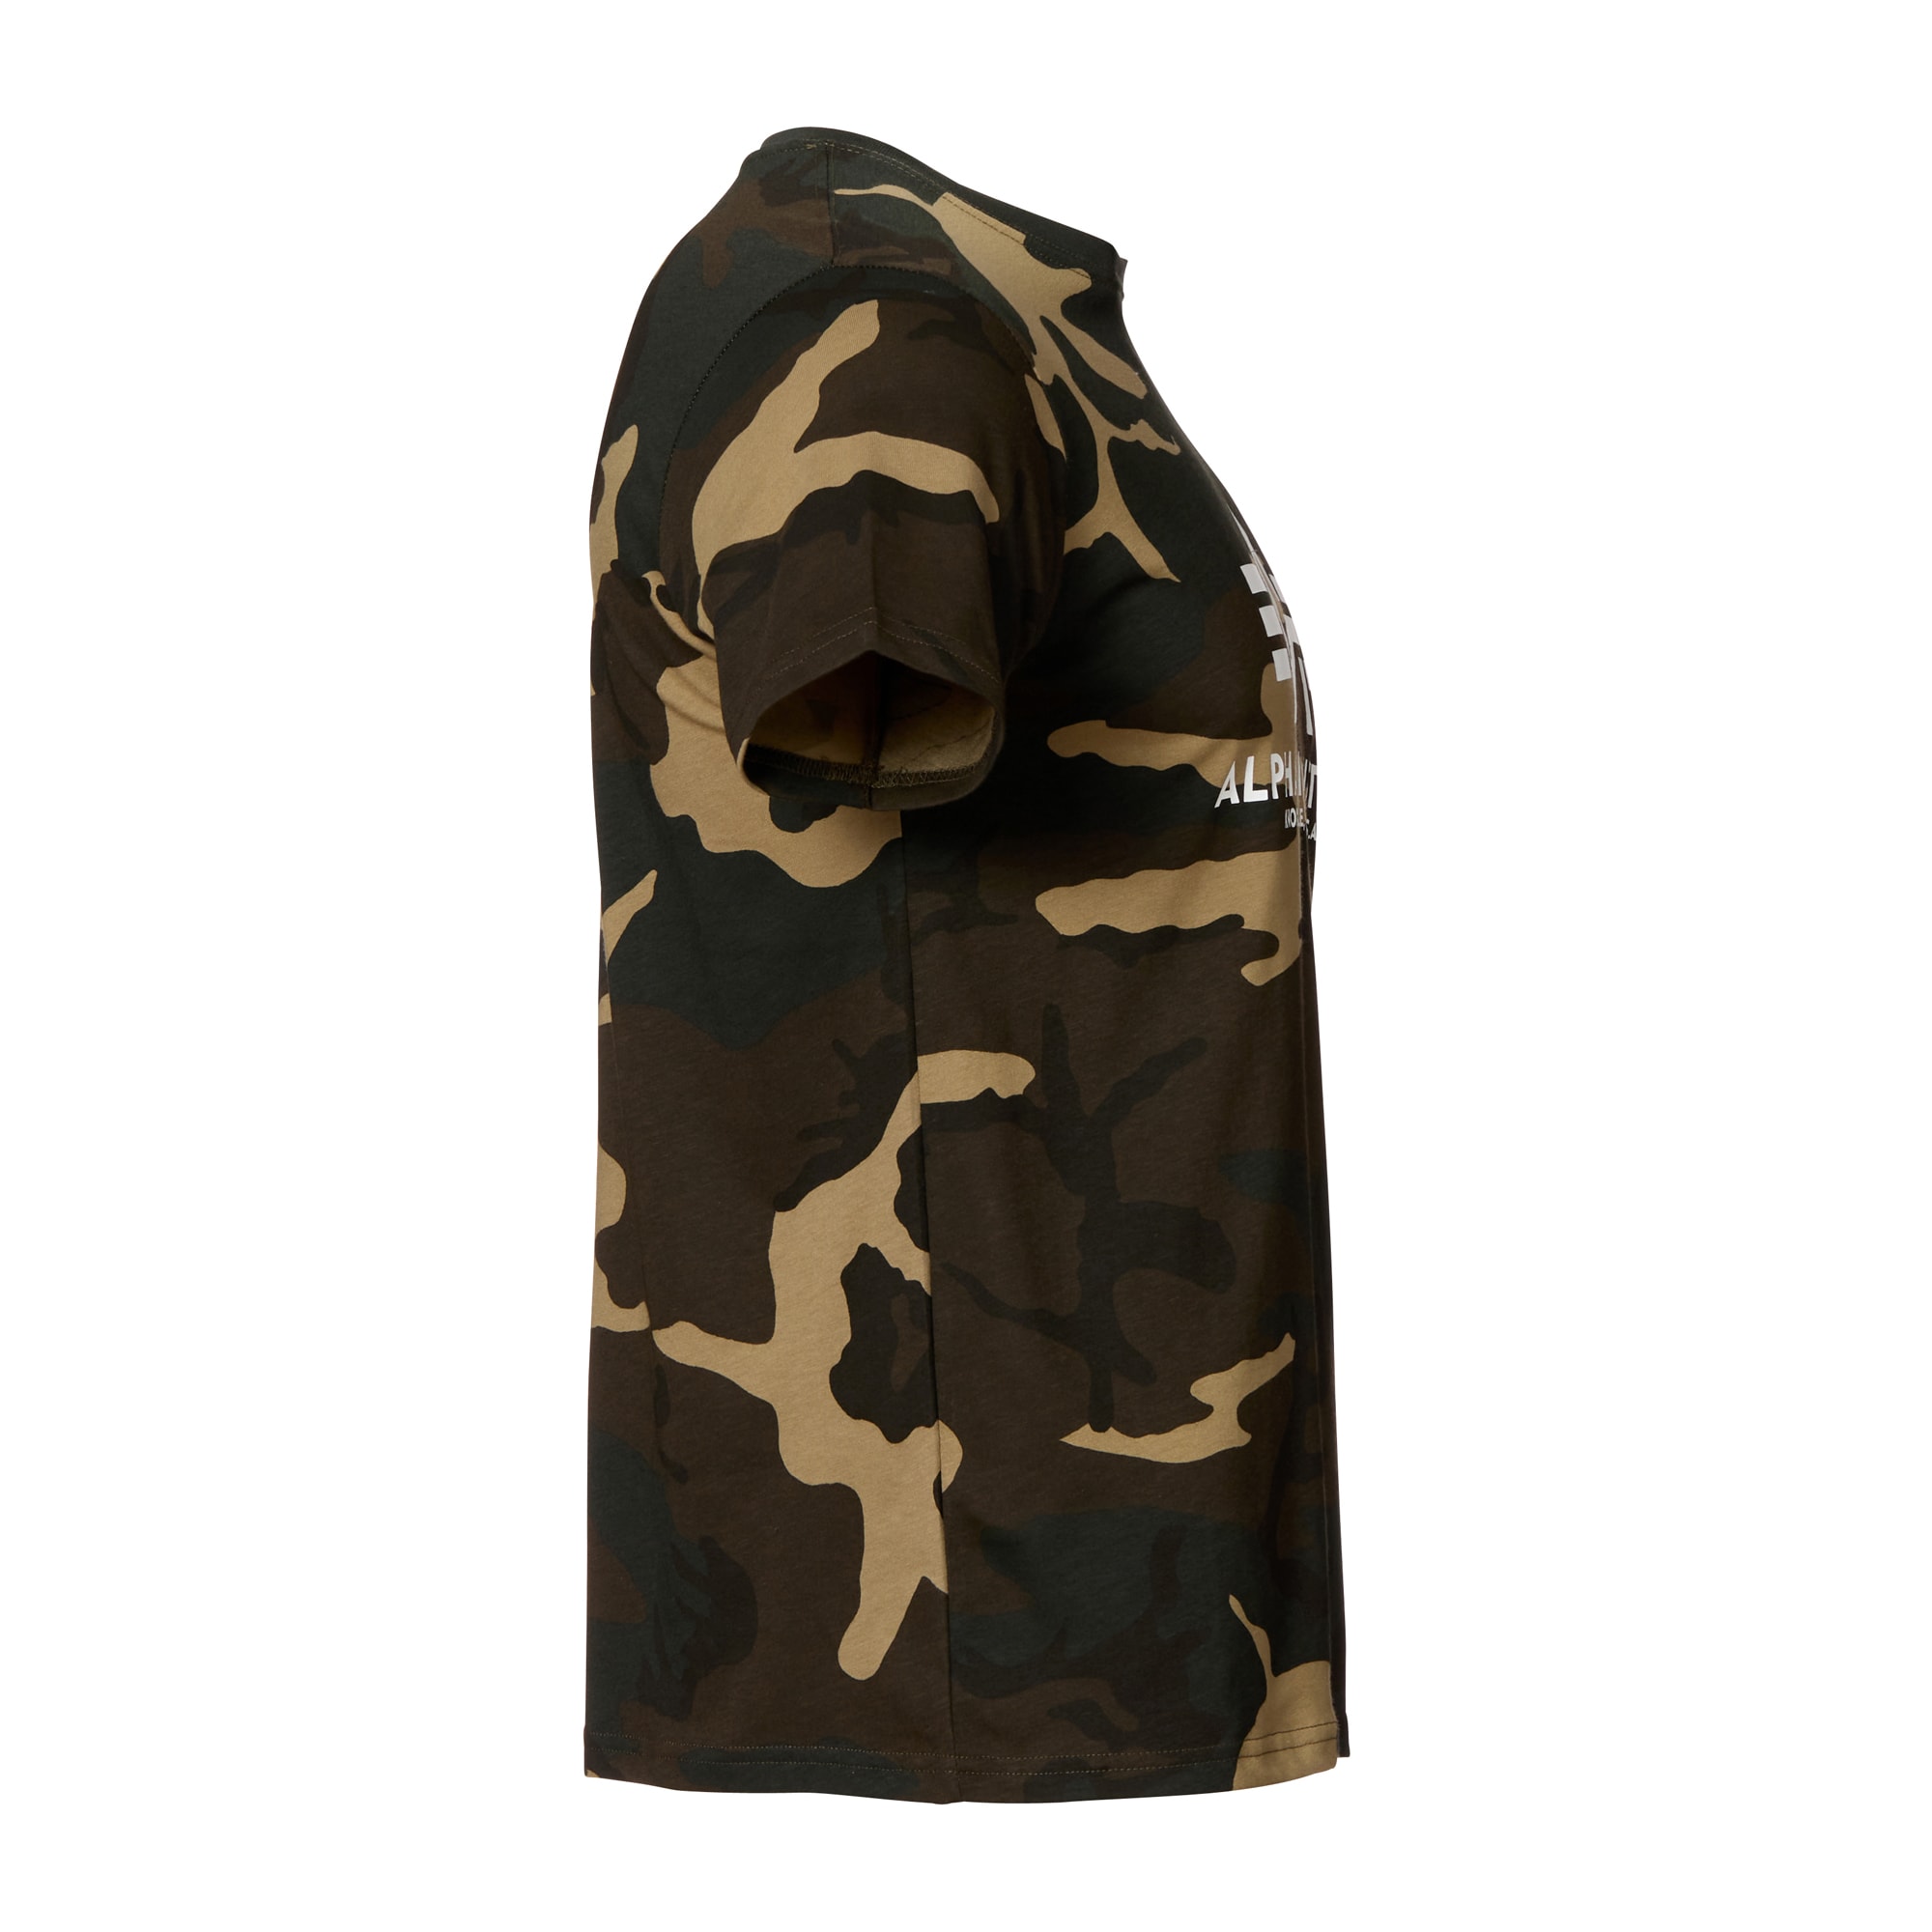 Bestpreis Purchase the Alpha 65 T-Shirt Basic by camo woodland Industries